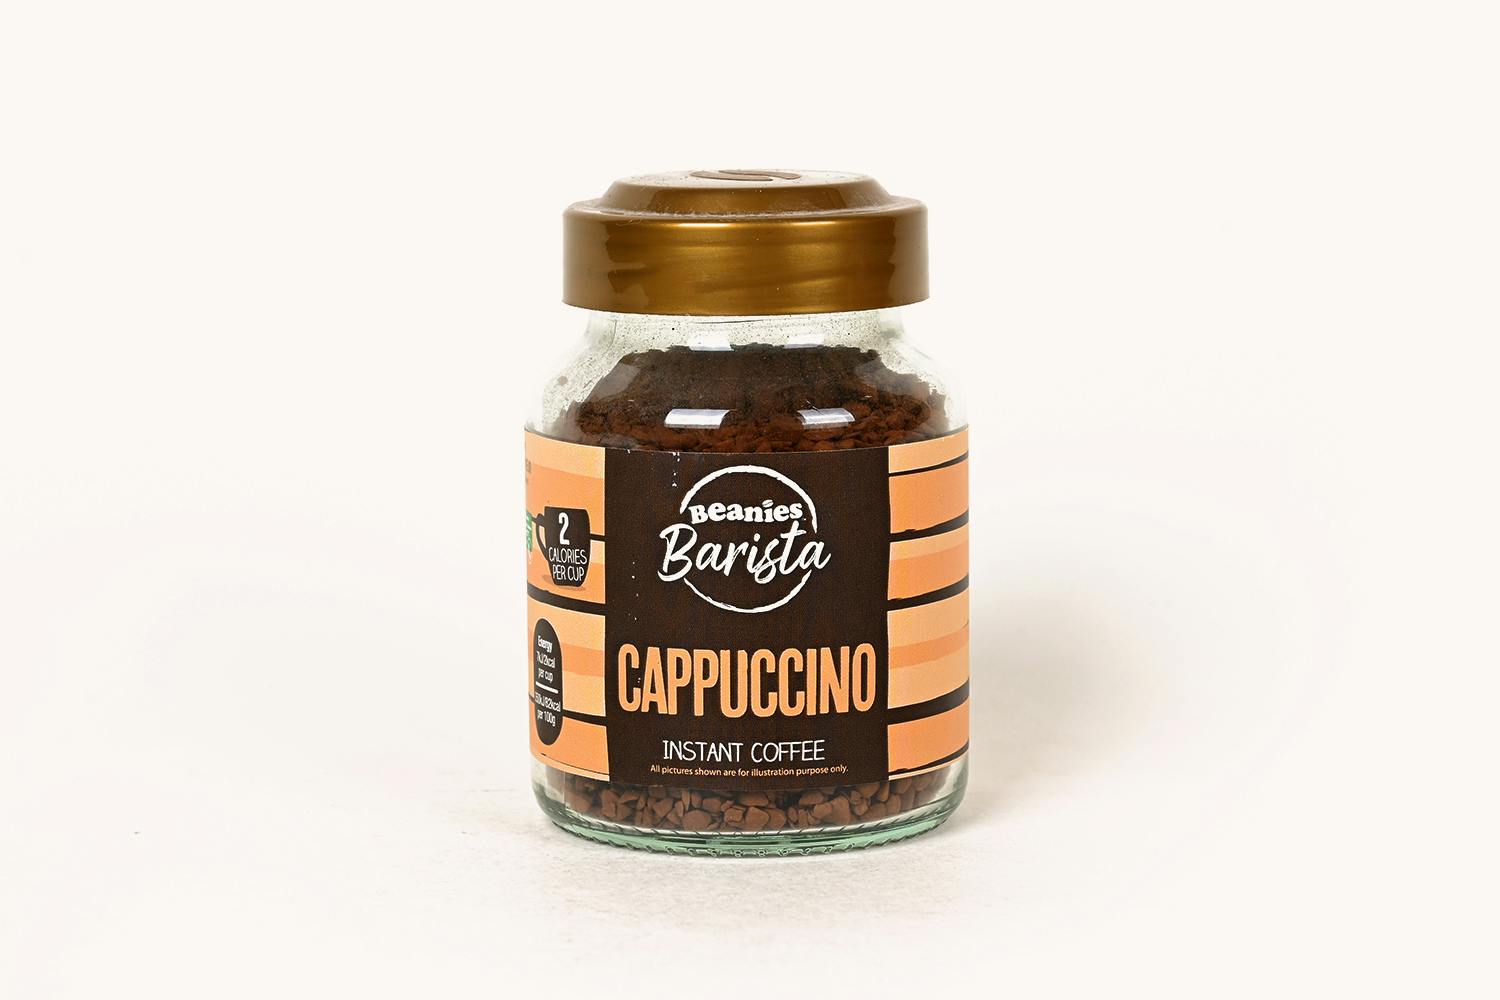 Beanies Instant Coffee - Cappuccino Flavour